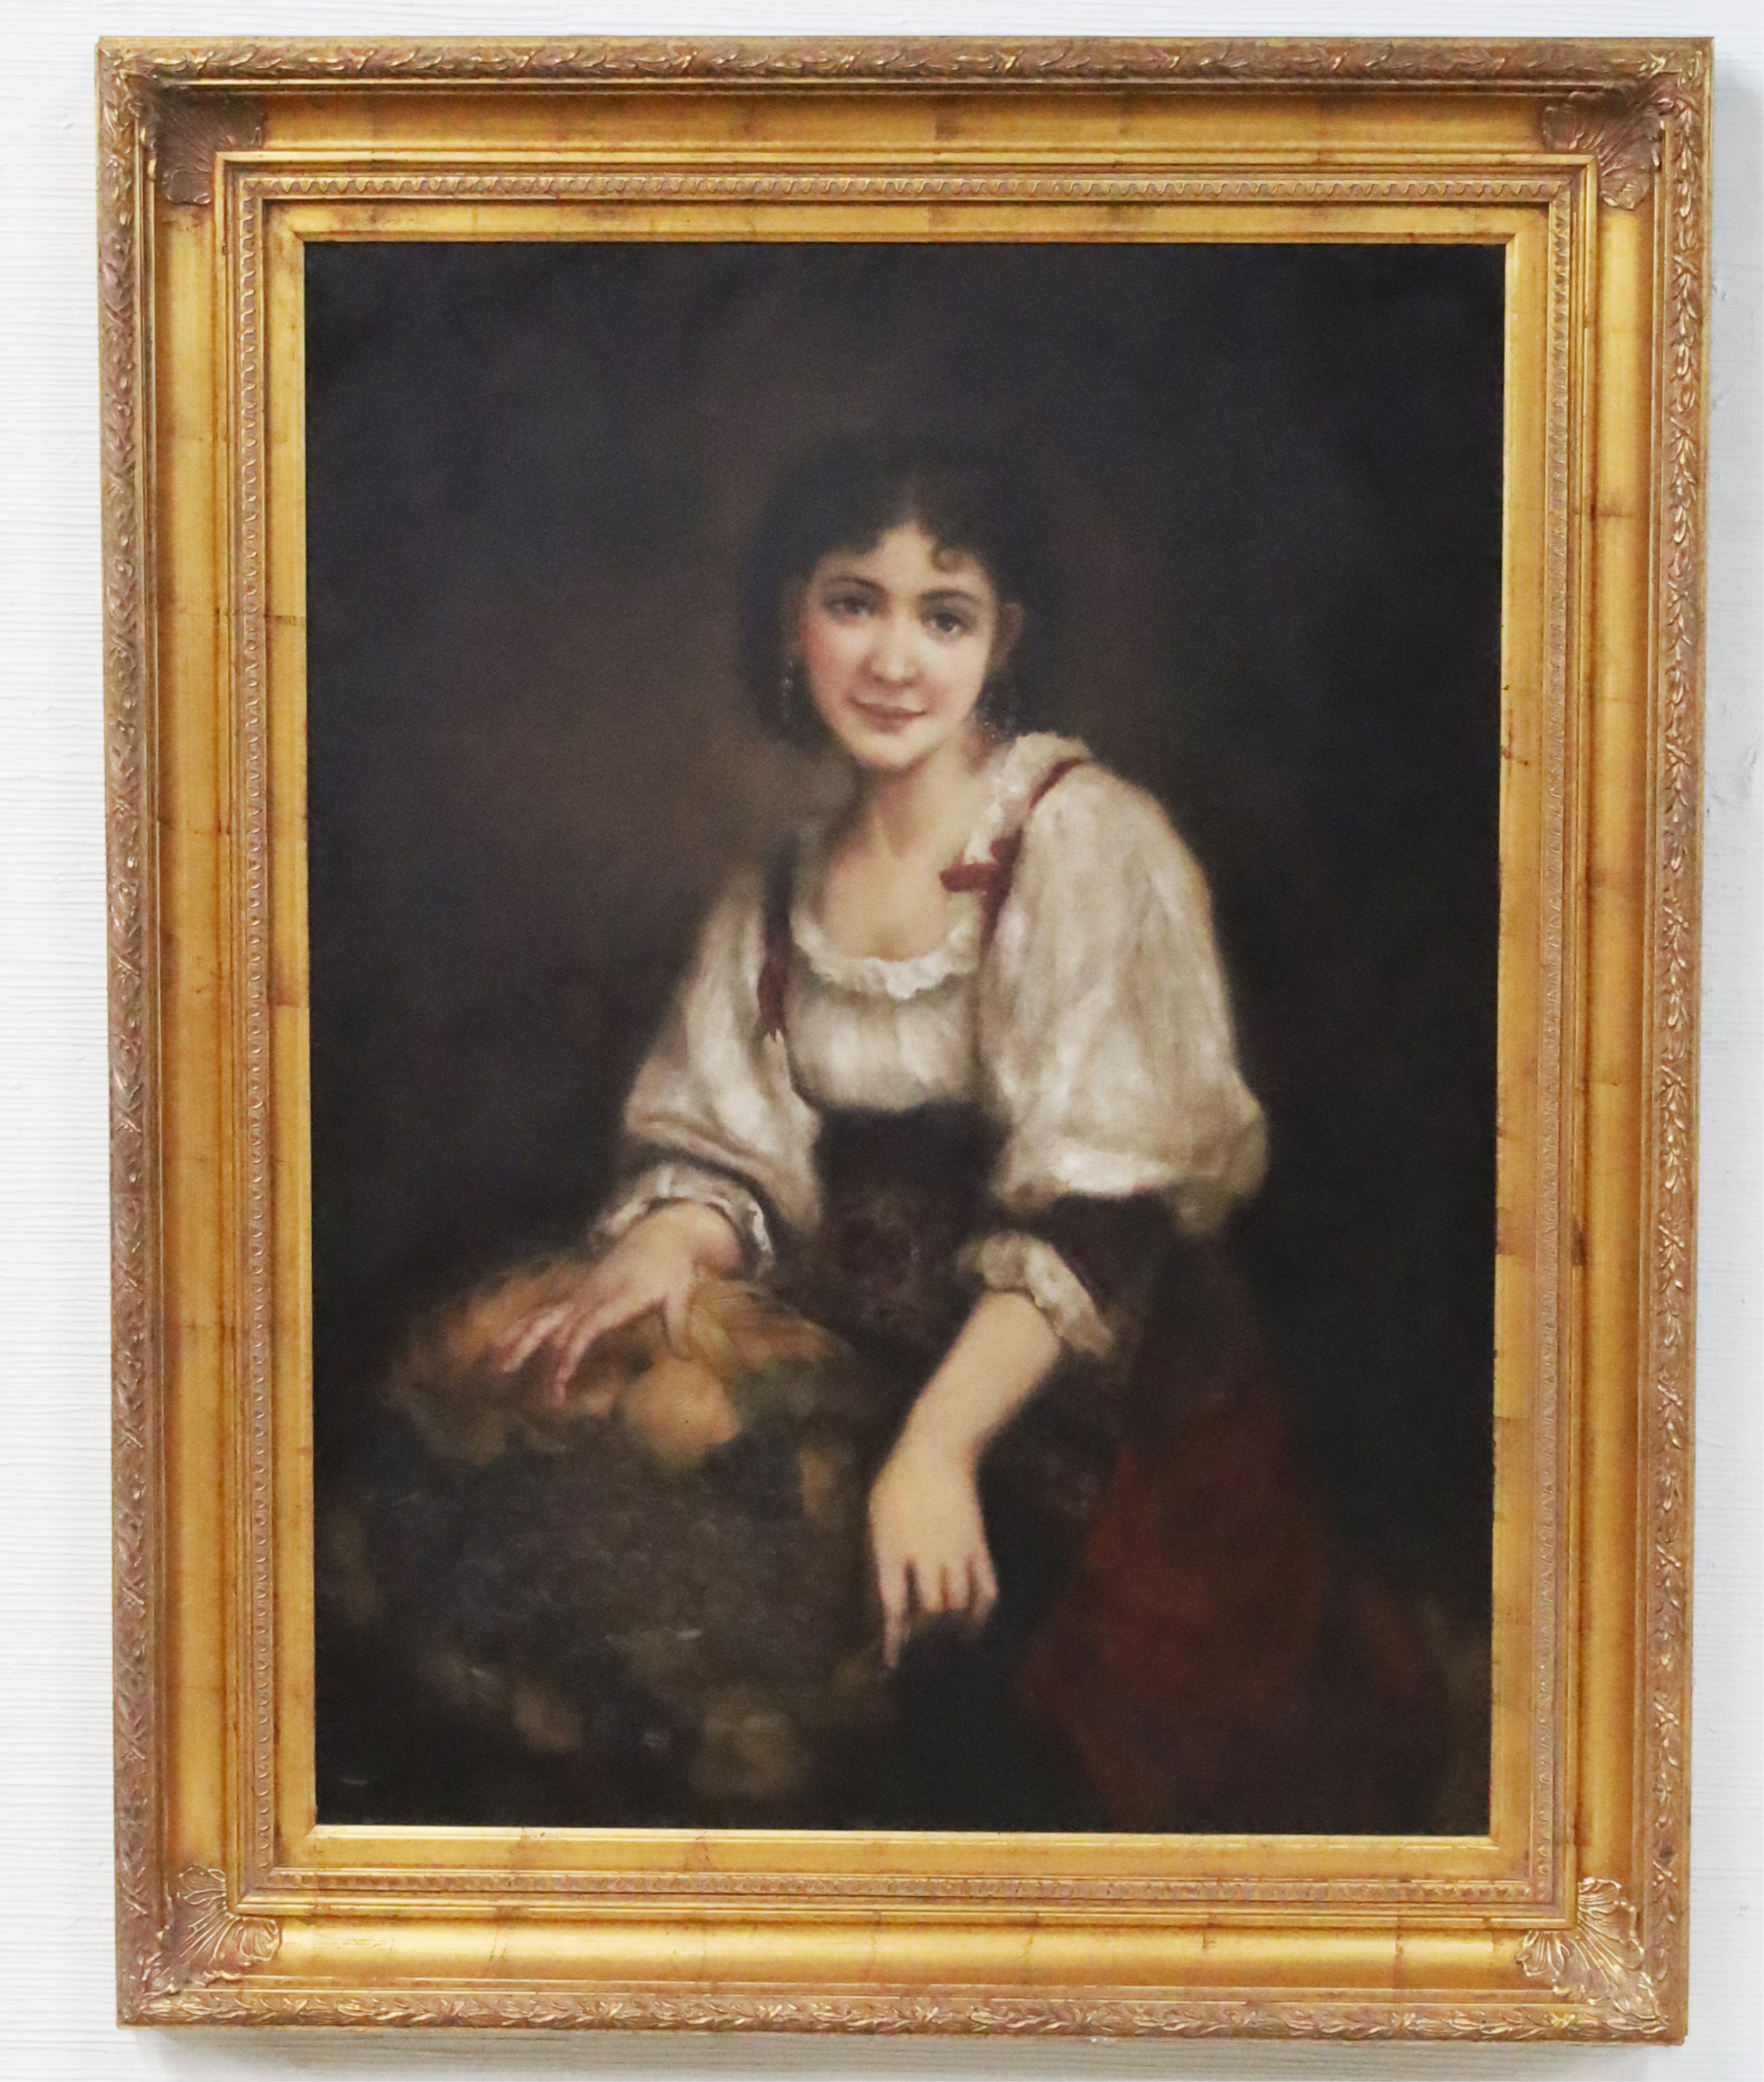 FRAMED O C PAINTING OF YOUNG GIRL 35dff2